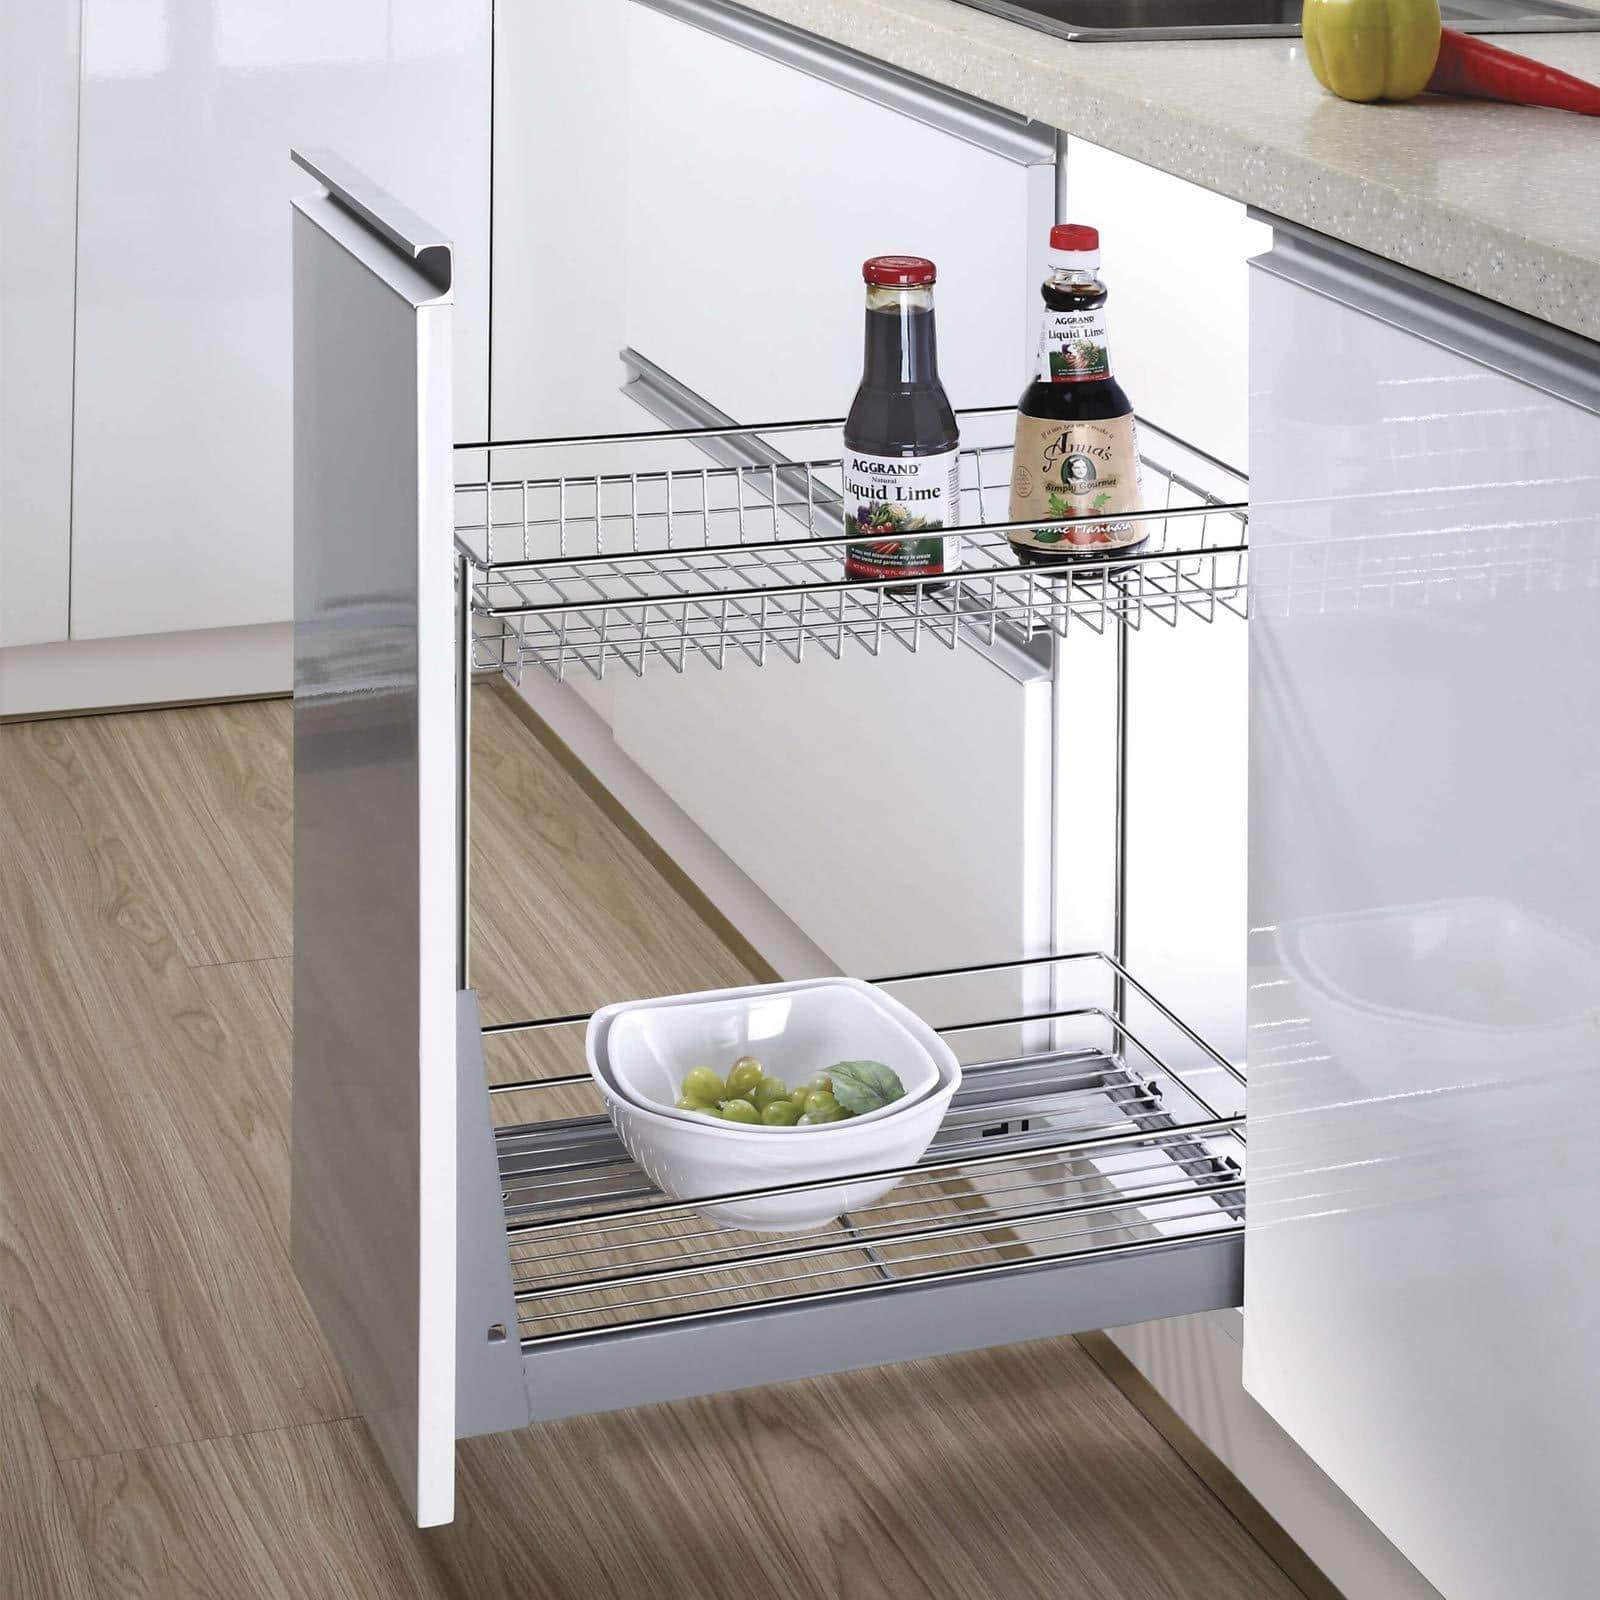 Exclusive 17 3x11 8x20 7 cabinet pull out chrome wire basket organizer 2 tier cabinet spice rack shelves bowl pan pots holder full pullout set